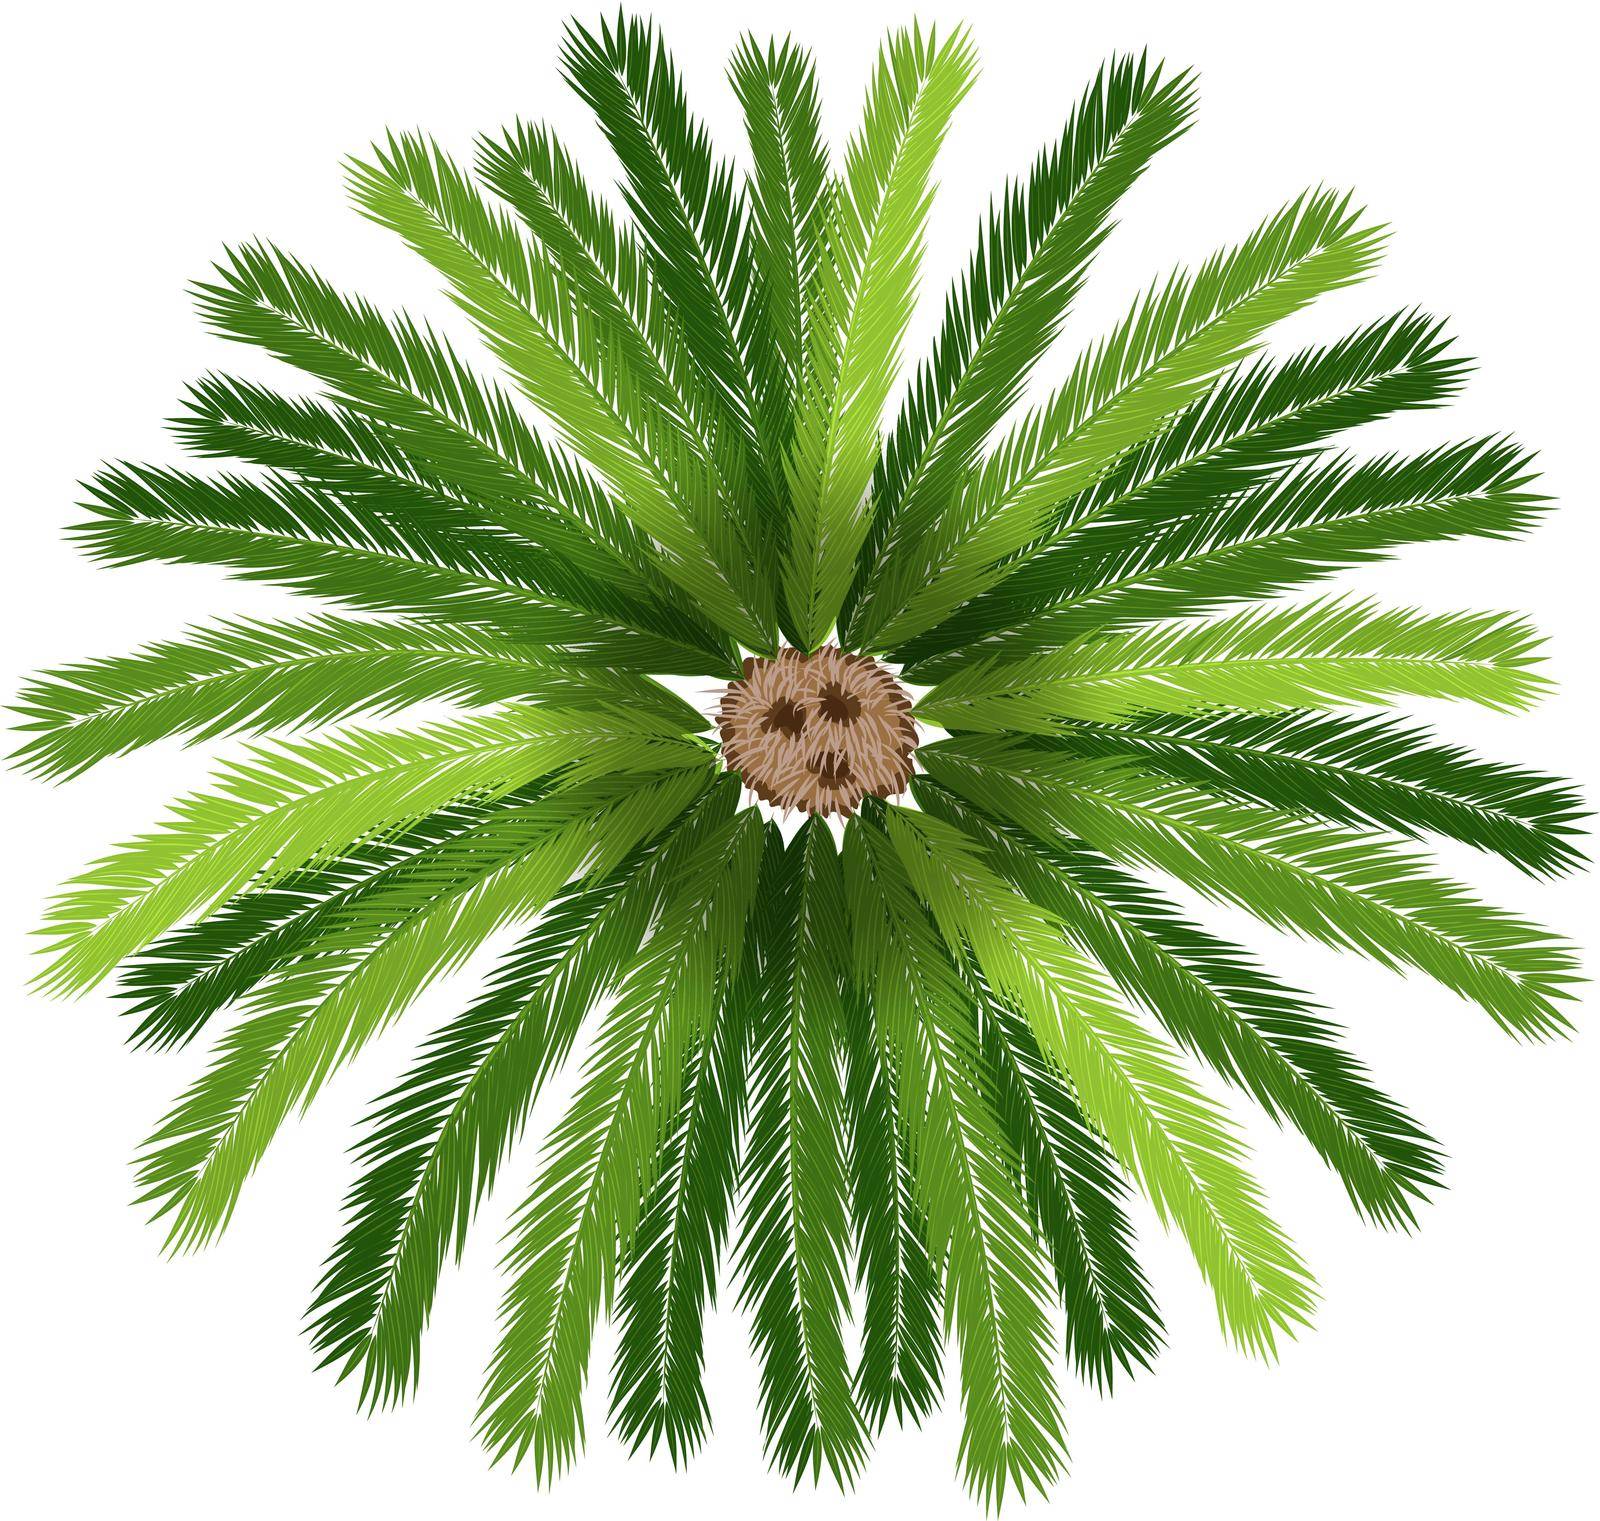 A sago palm tree by iimages